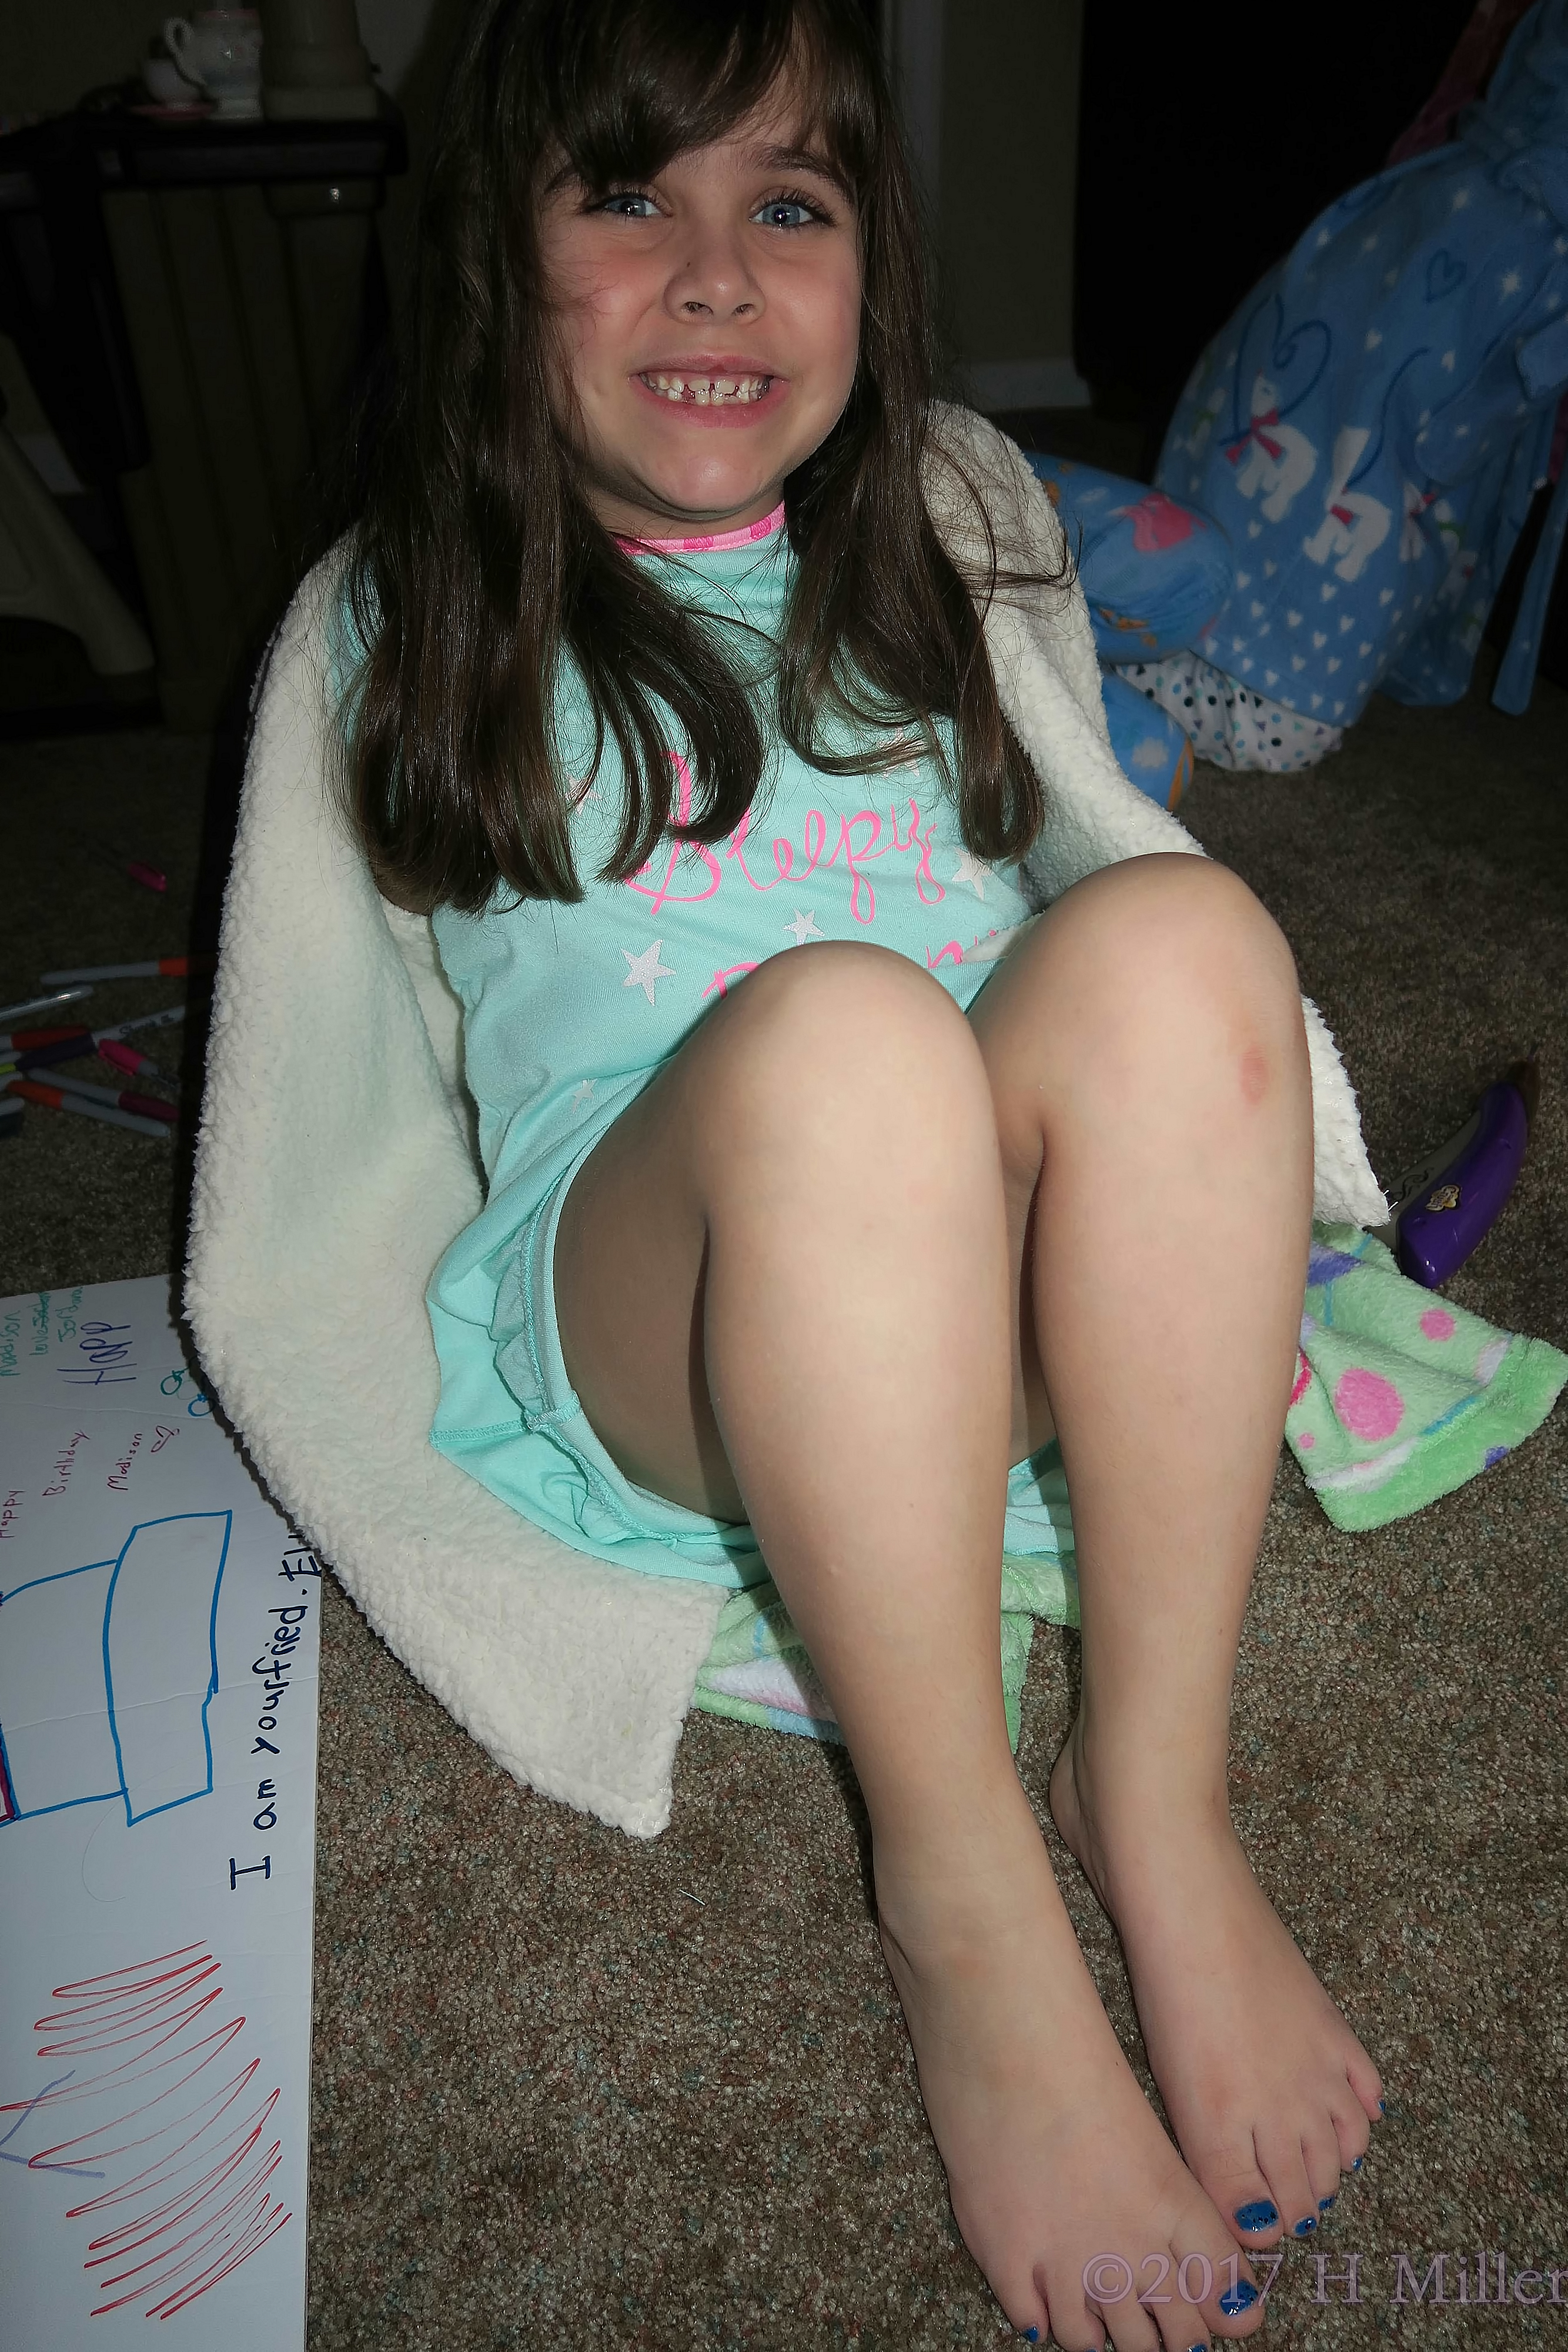 Children's Mini Pedicures, That's Fun And Exciting! 4